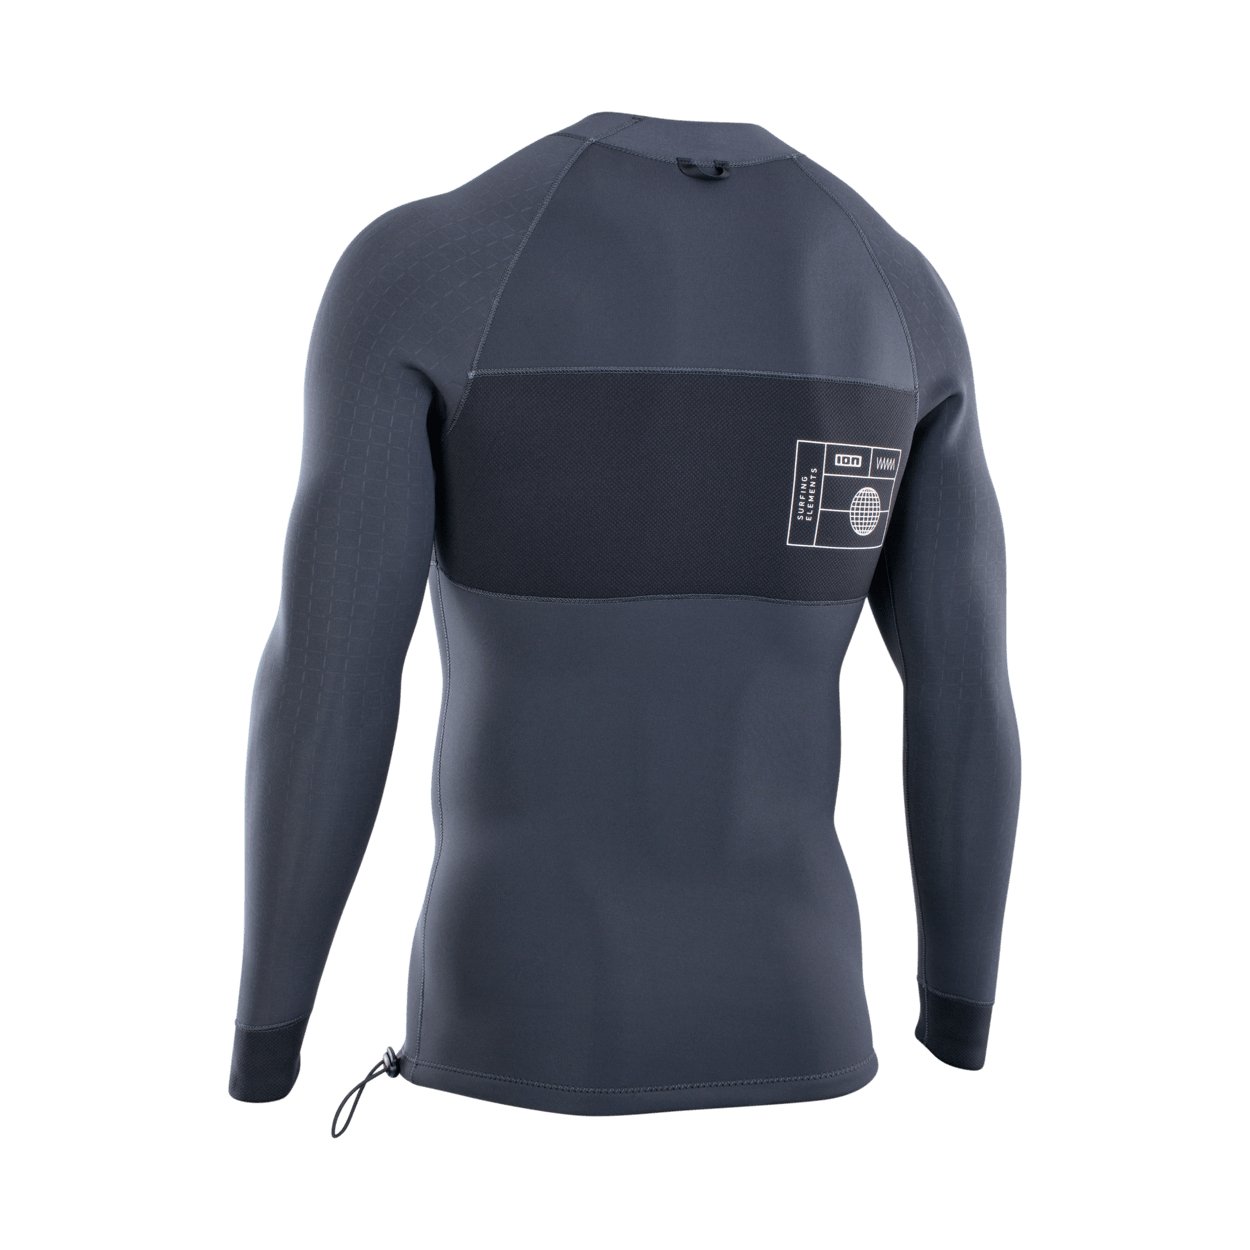 ION Neo Top 2/2 LS men 2022 - Worthing Watersports - 9010583058665 - Tops - ION Water